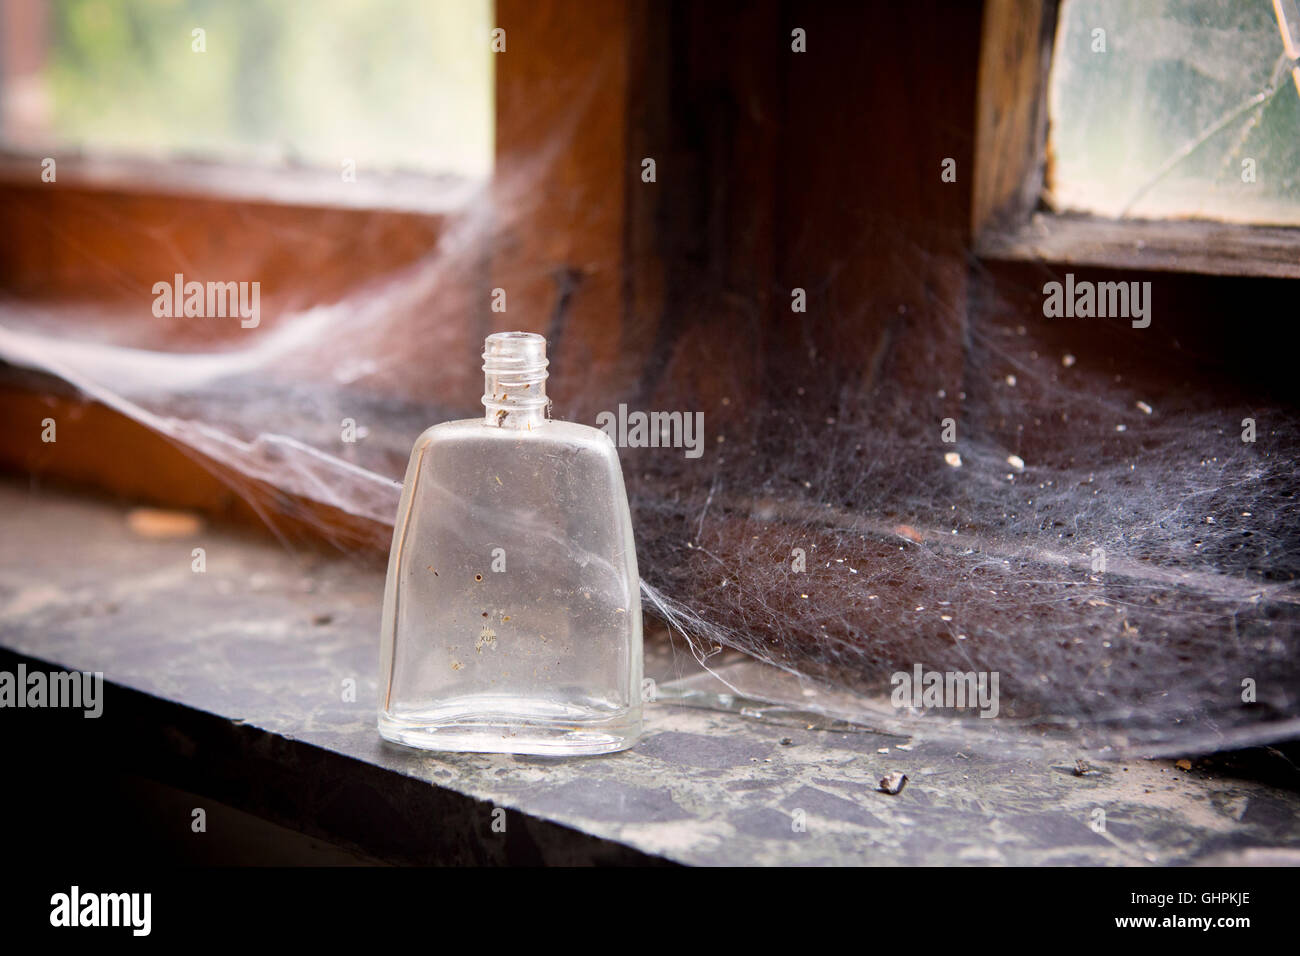 Empty old bottle in a window with cobwebs Stock Photo